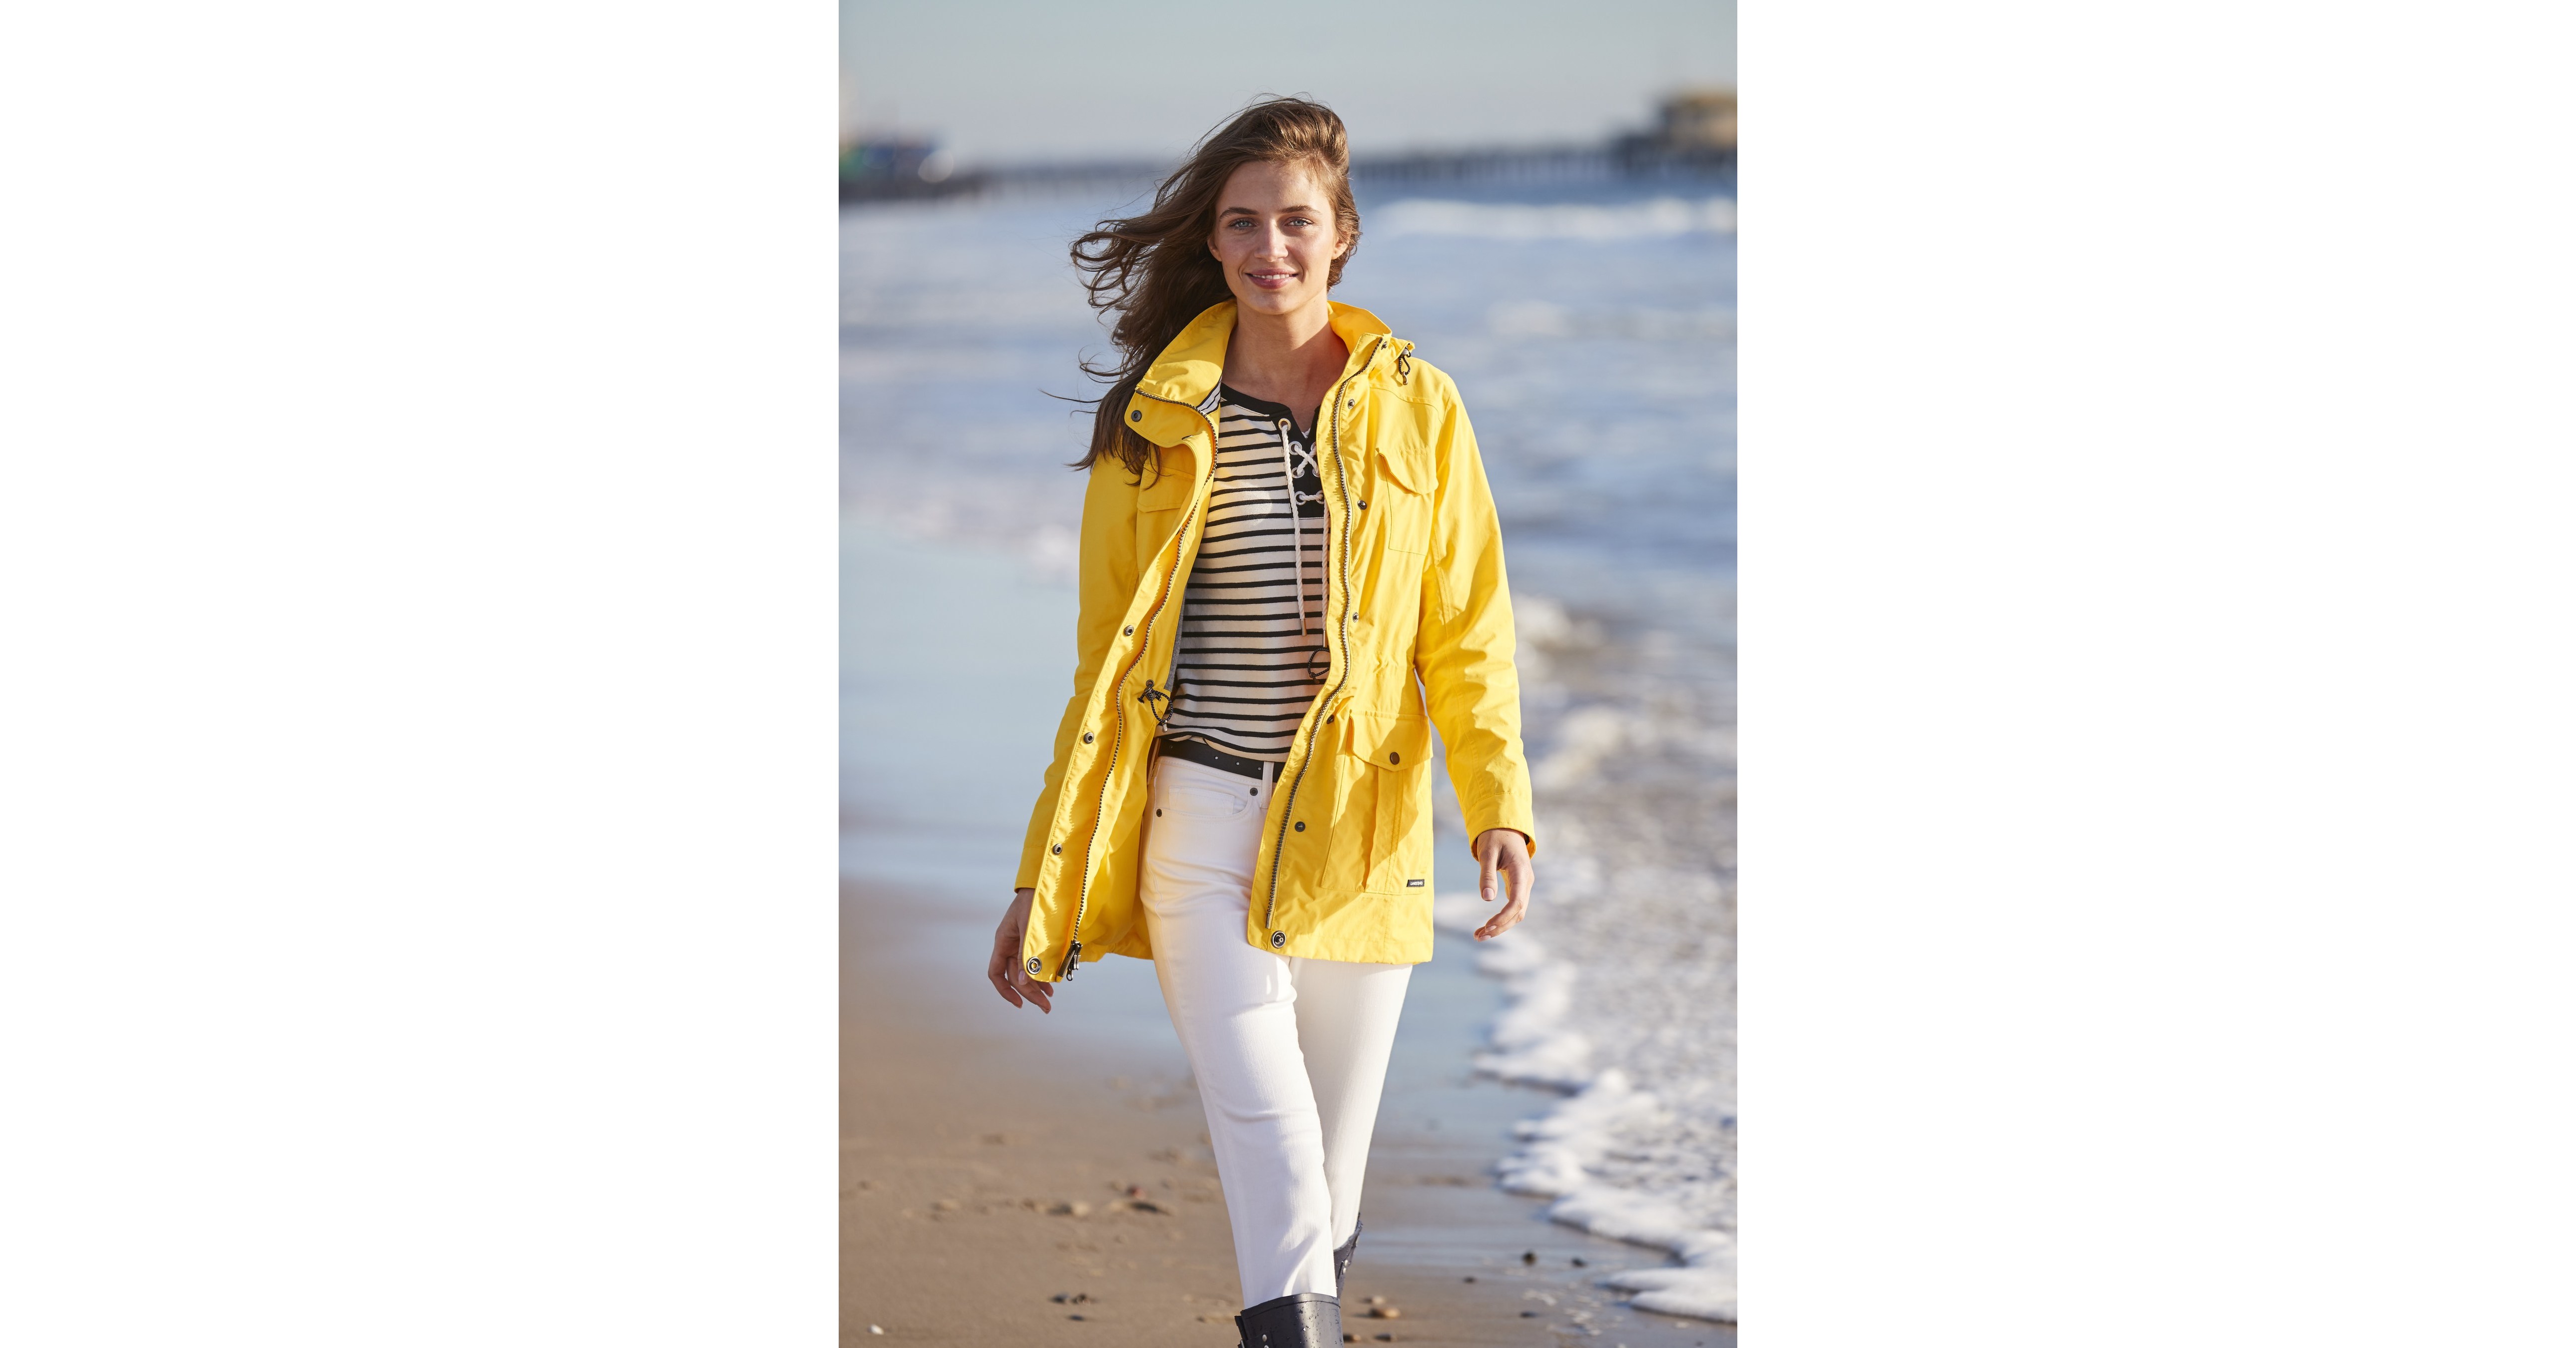 Lands' End Takes Spring Outerwear by Storm